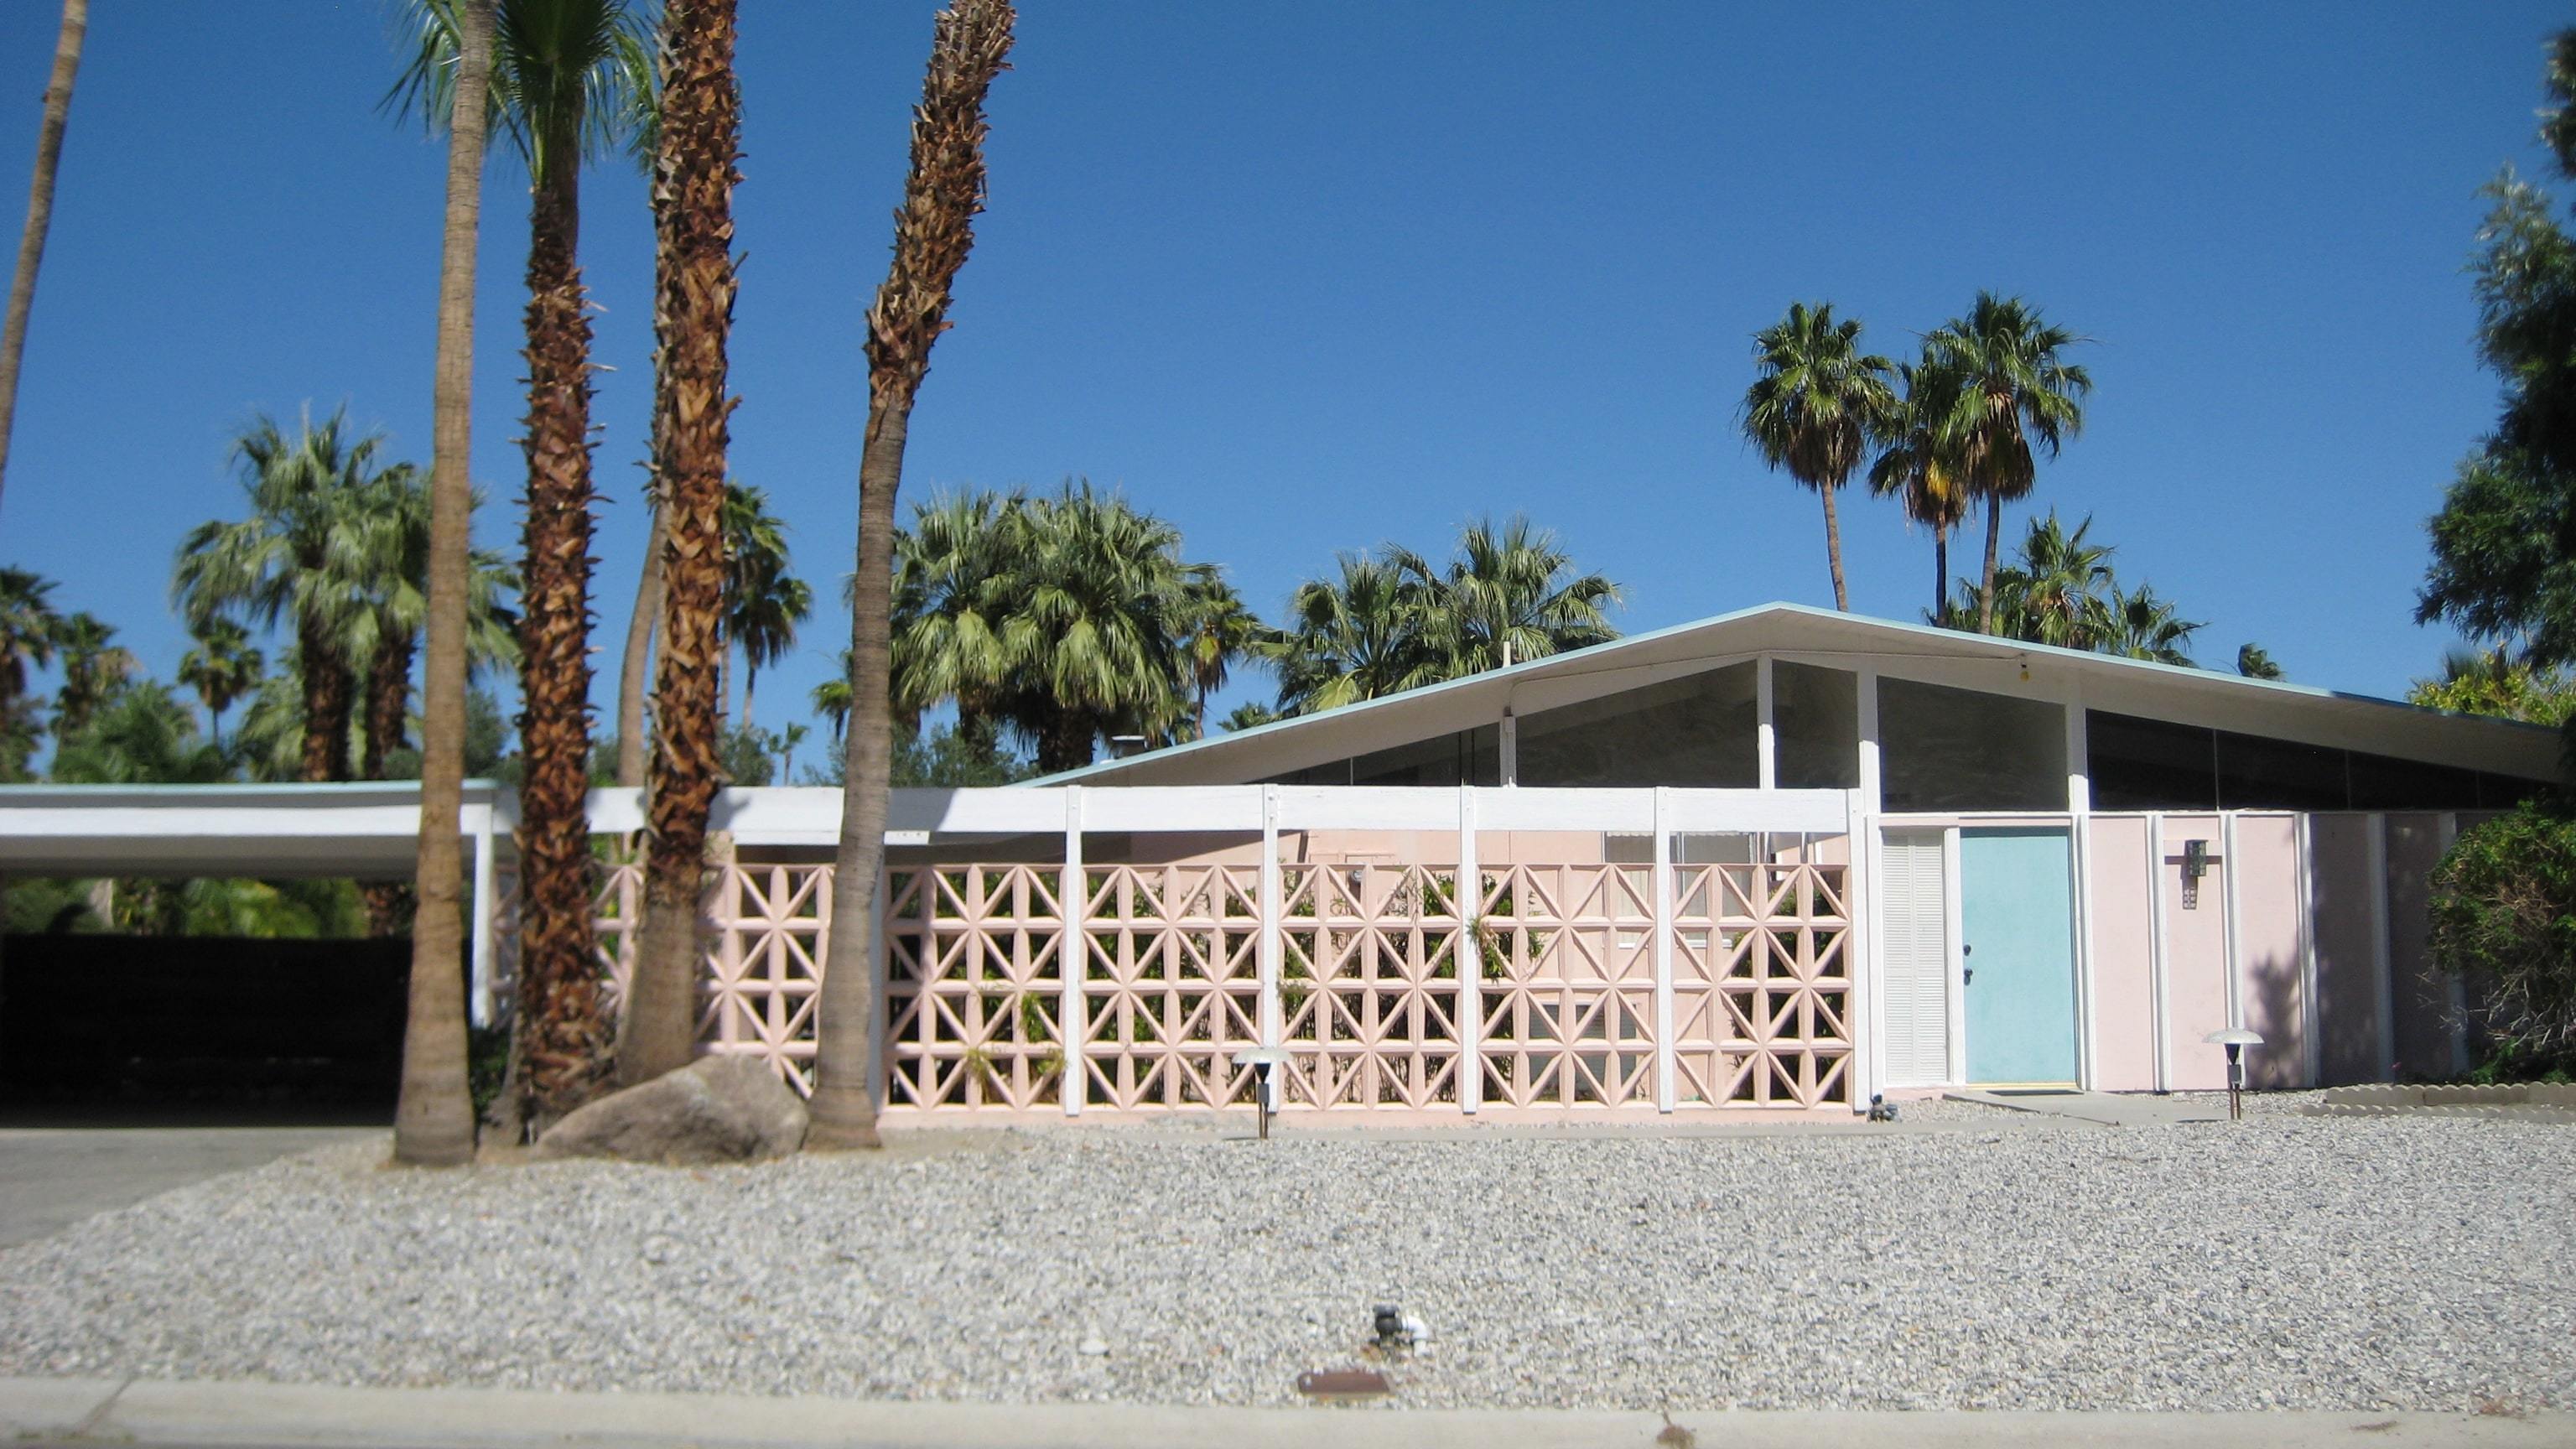 Mid century modern homes typical of Palm Springs real estate